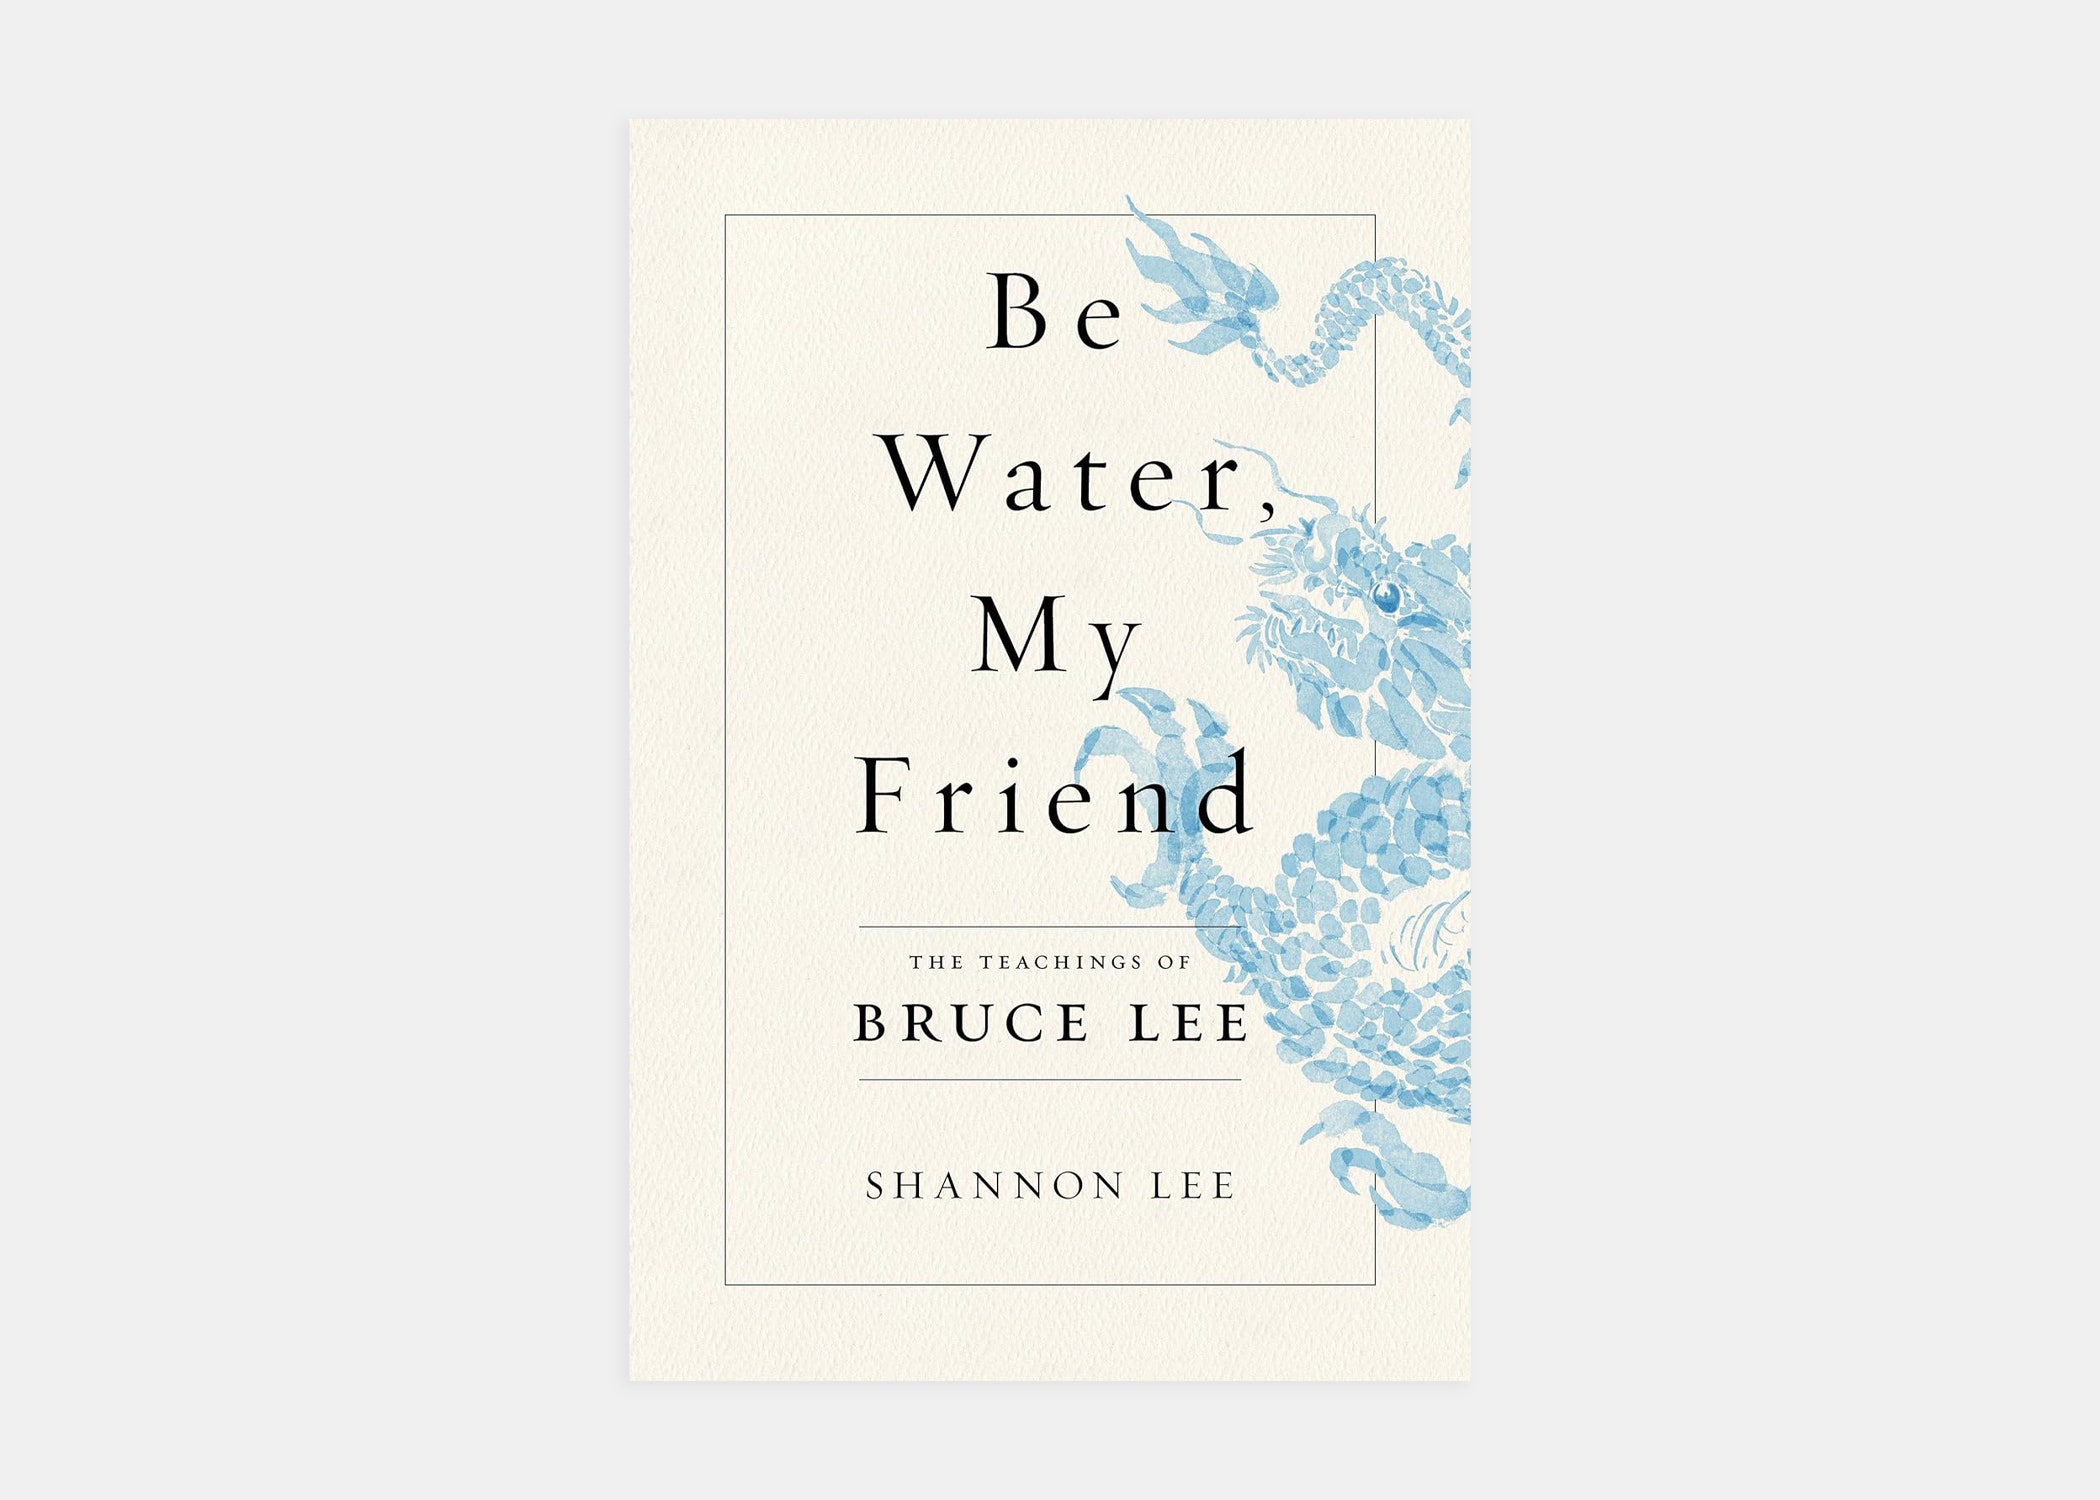 <p>Martial artist and actor Bruce Lee’s daughter, Shannon Lee, wrote this book as a guide to her father's teachings. It’s an inspirational and profound commentary on life, learning, and self. If one of your 2024 goals is self-improvement, this is an excellent choice and can easily be finished on a flight from <a href="https://www.cntraveler.com/destinations/new-york-city?mbid=synd_msn_rss&utm_source=msn&utm_medium=syndication">New York City</a> to <a href="https://www.cntraveler.com/destinations/san-francisco?mbid=synd_msn_rss&utm_source=msn&utm_medium=syndication">San Francisco</a> or <a href="https://www.cntraveler.com/destinations/london?mbid=synd_msn_rss&utm_source=msn&utm_medium=syndication">London</a>.</p> <p><strong>Page count:</strong> 240</p> <p><strong>Average read time:</strong> 3 hours and 50 minutes</p> $17, Amazon. <a href="https://www.amazon.com/Be-Water-My-Friend-Teachings/dp/1250206707/ref=sr_1_1">Get it now!</a><p>Sign up to receive the latest news, expert tips, and inspiration on all things travel</p><a href="https://www.cntraveler.com/newsletter/the-daily?sourceCode=msnsend">Inspire Me</a>